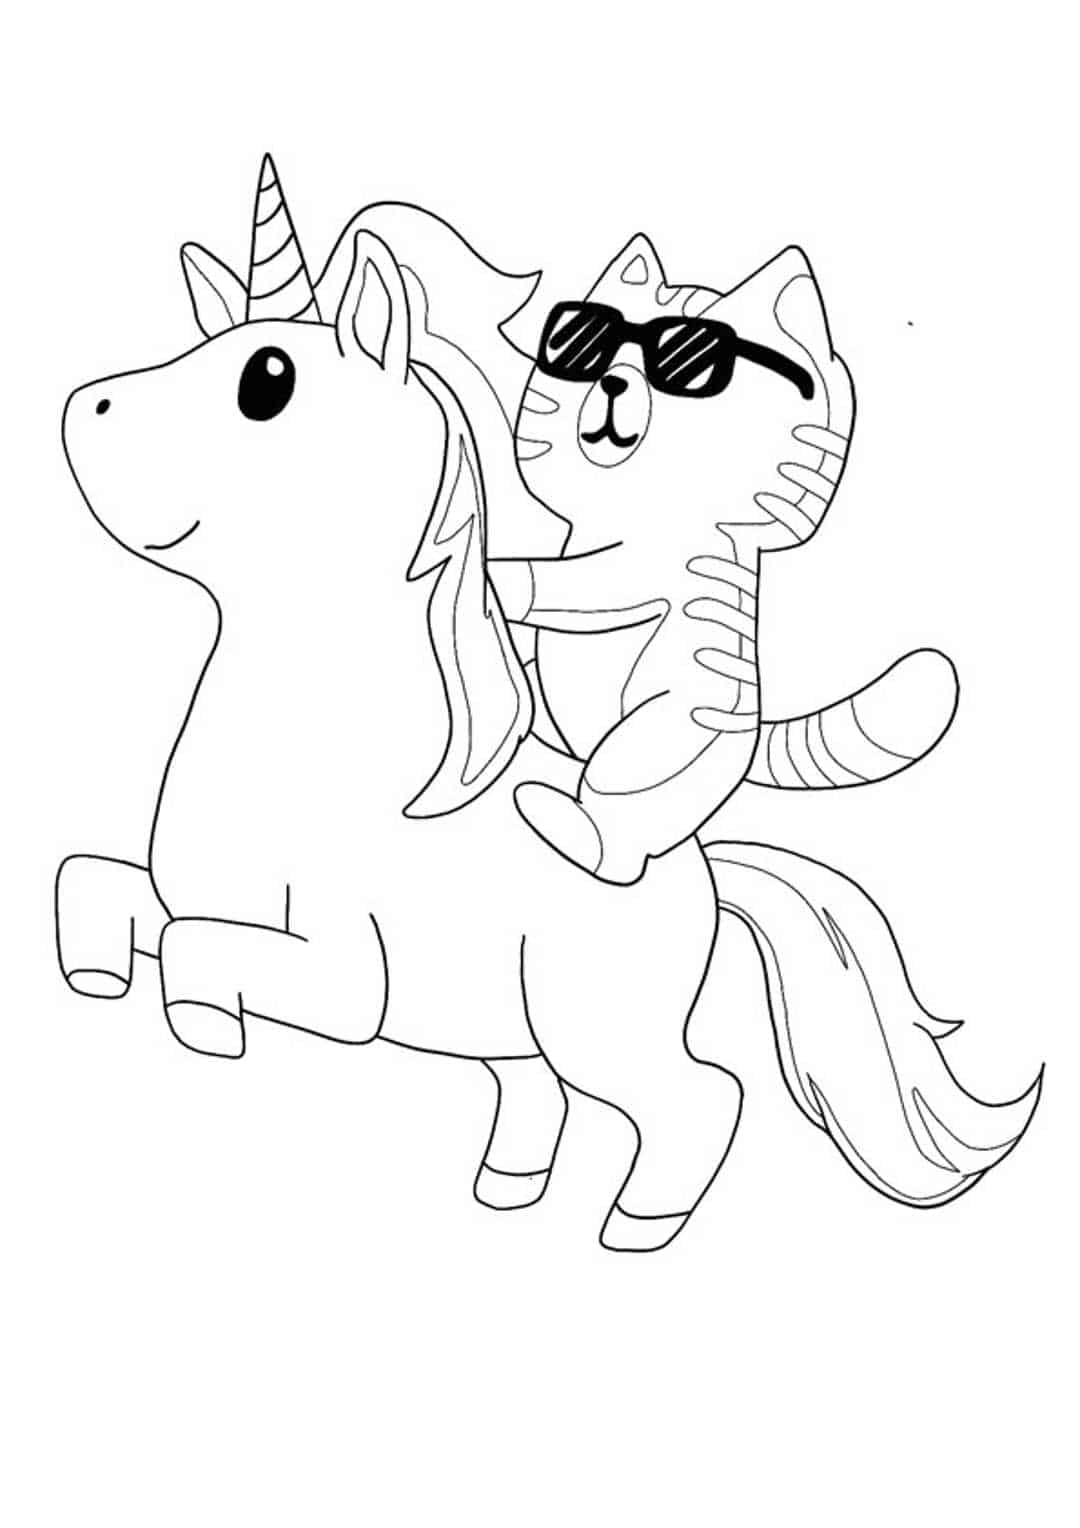 Cat riding unicorn Coloring Pages